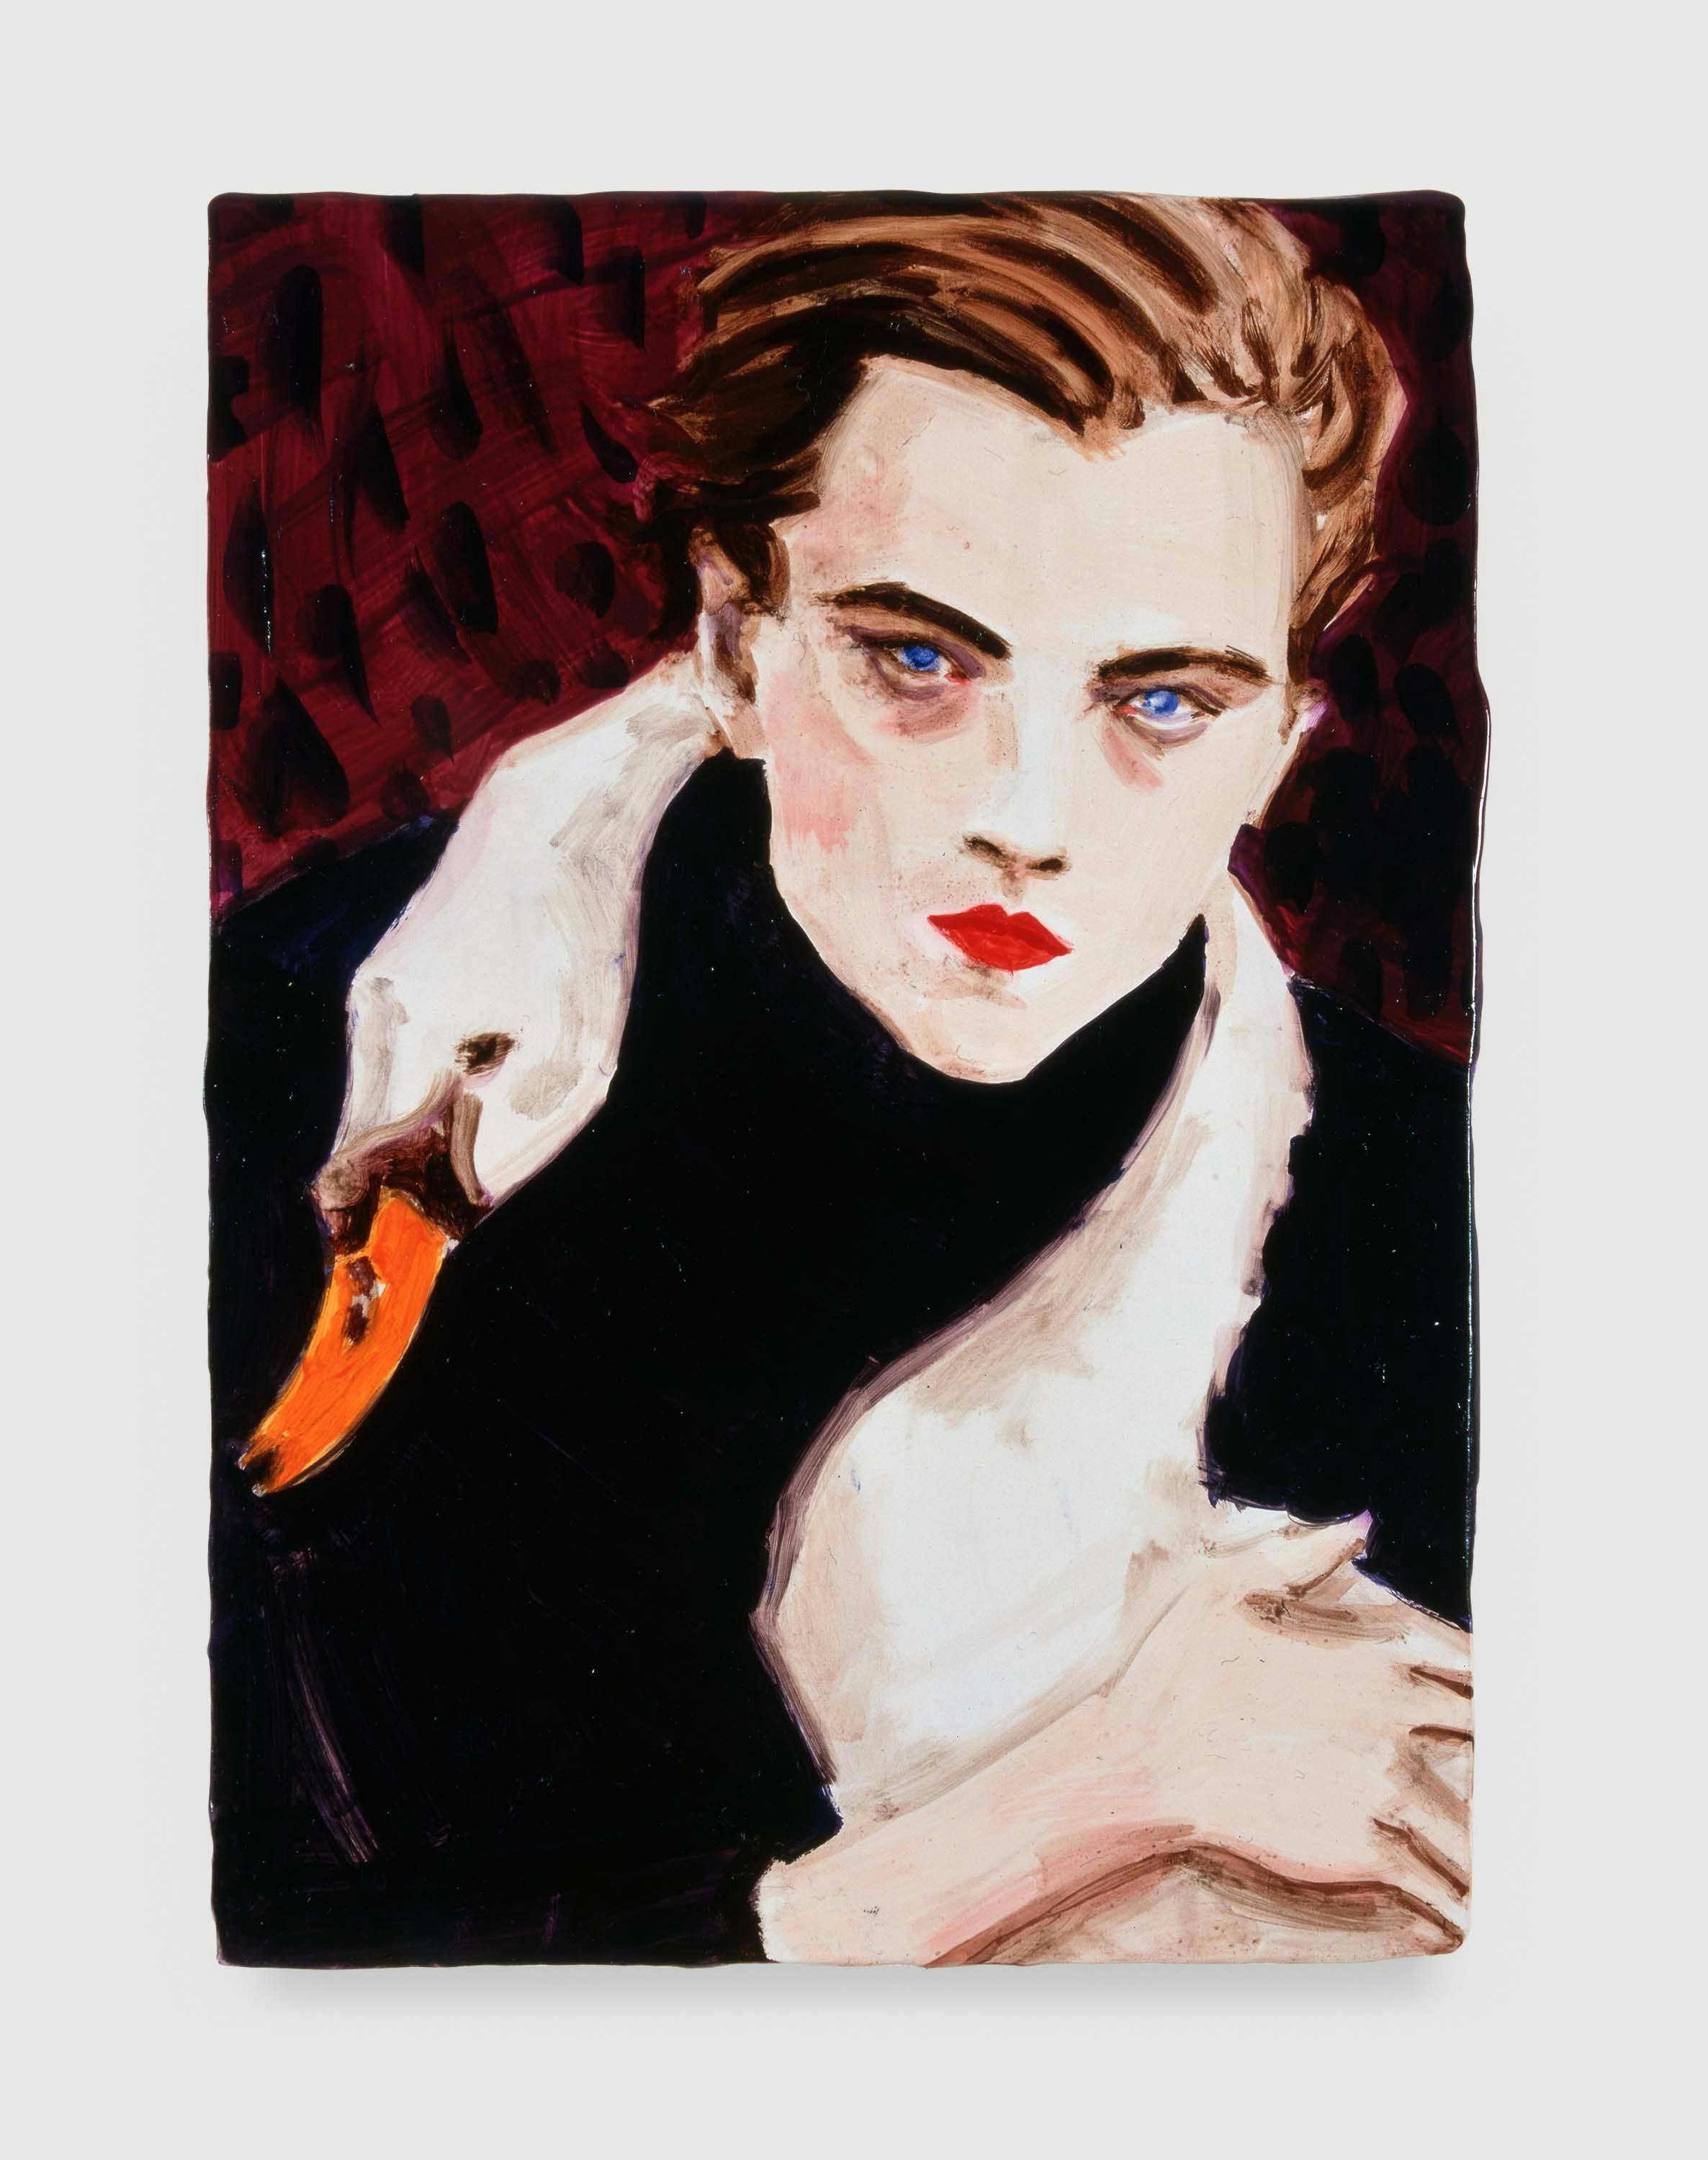 A painting by Elizabeth Peyton, titled Swan (Leonardo DiCaprio), dated 1998.